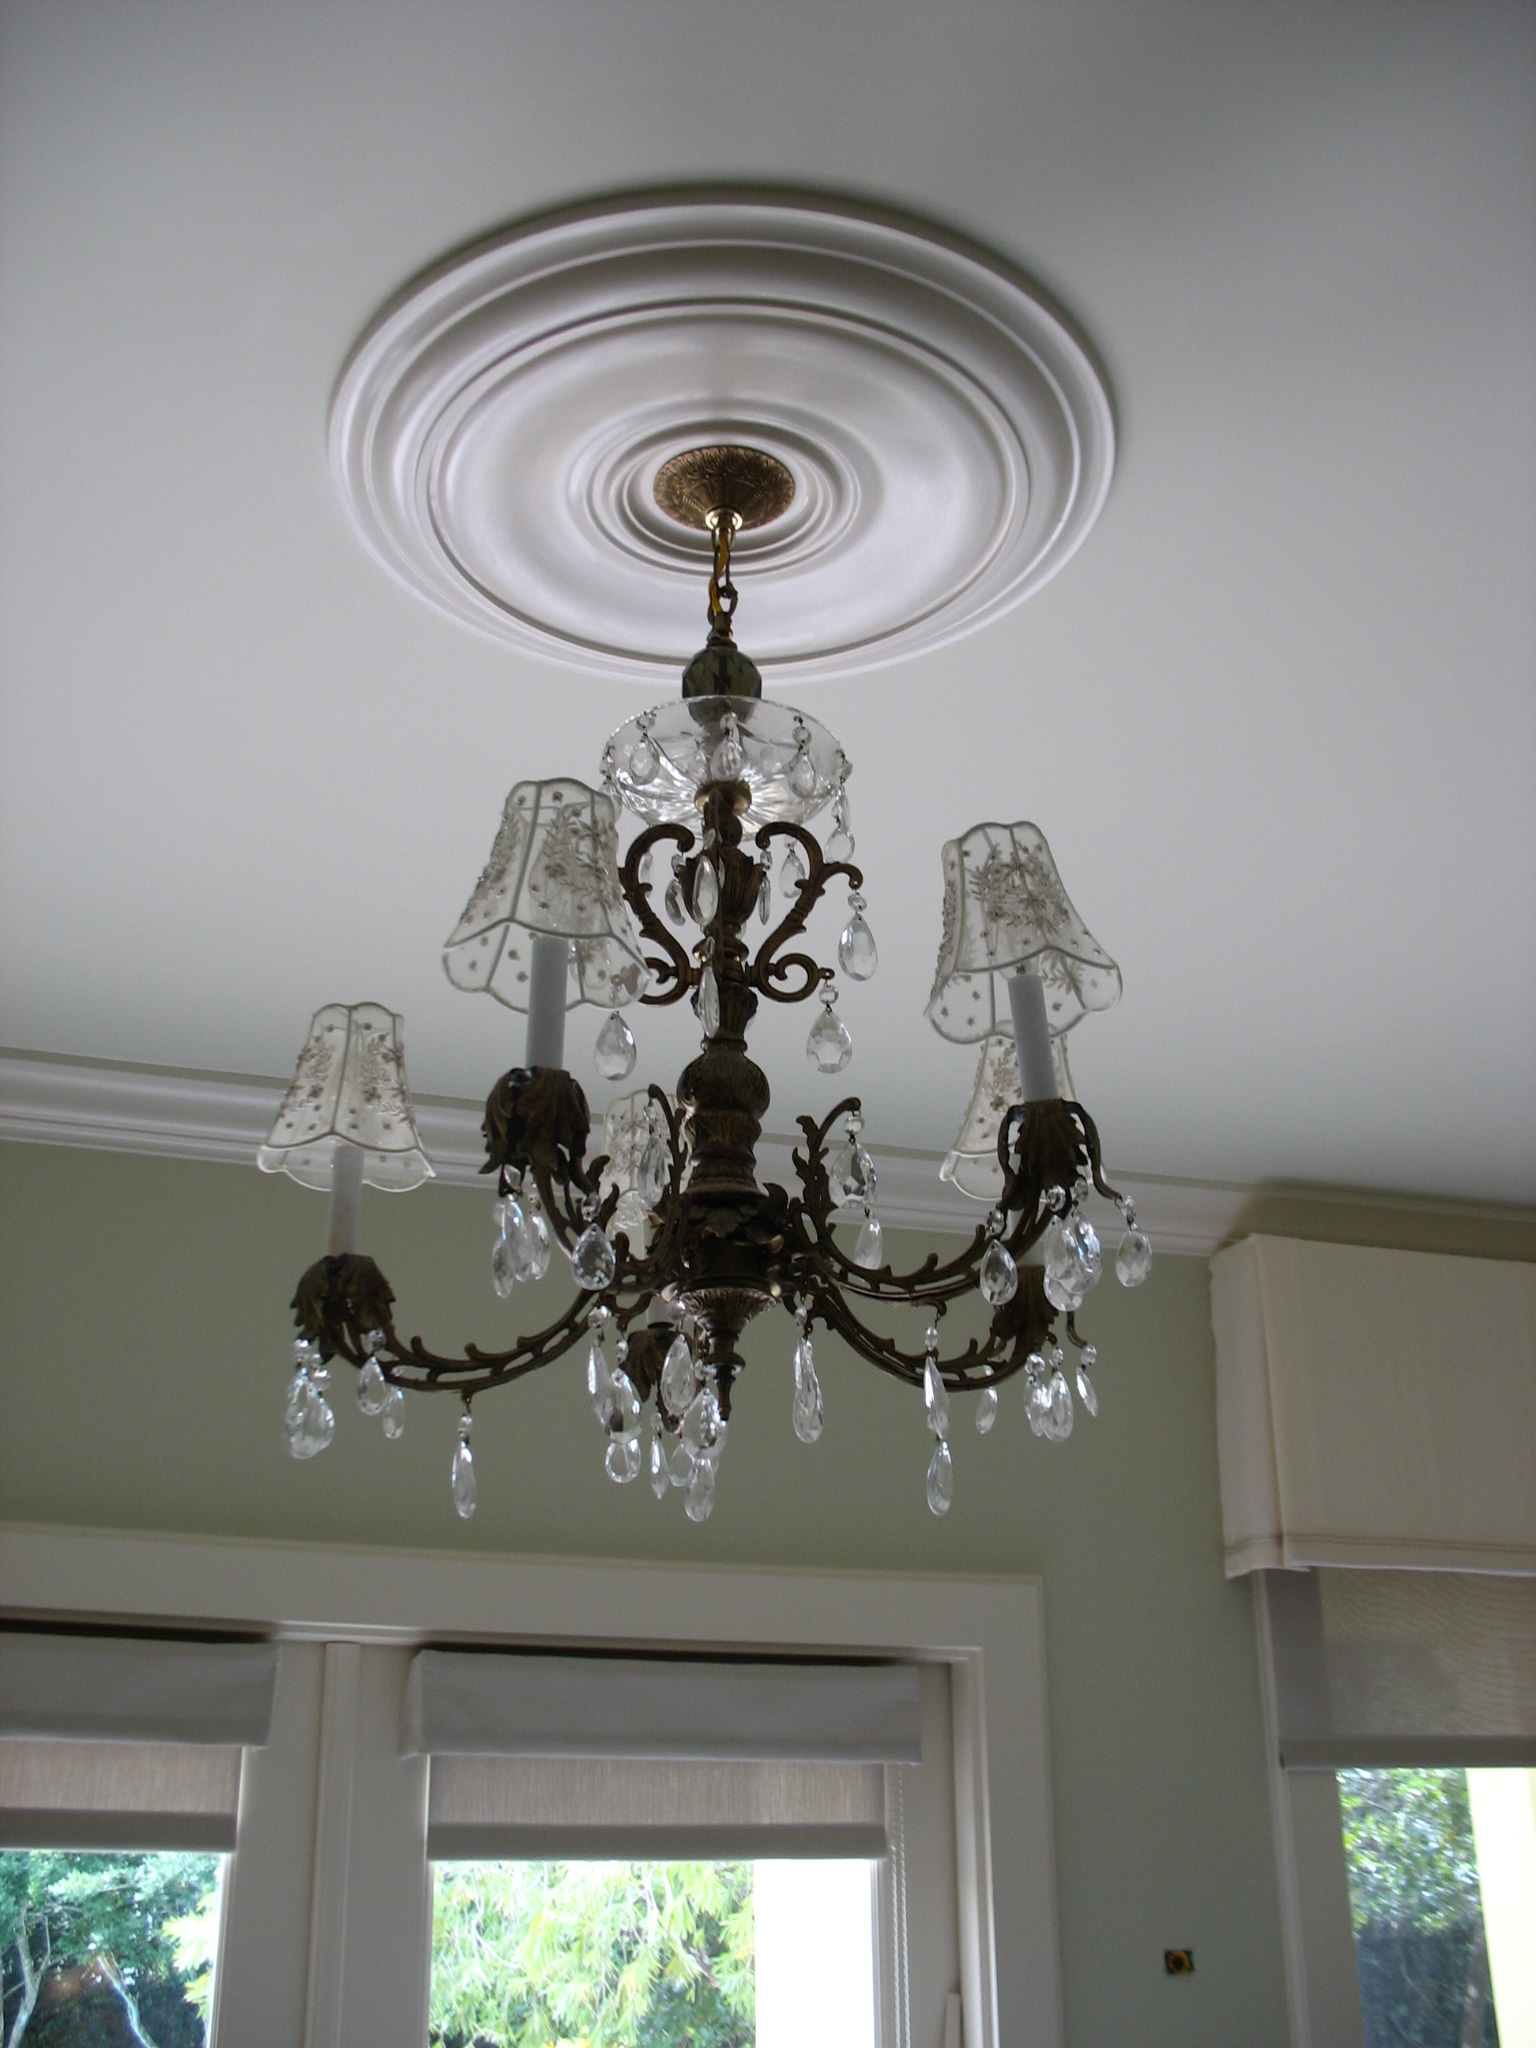 New chandelier in the sitting area